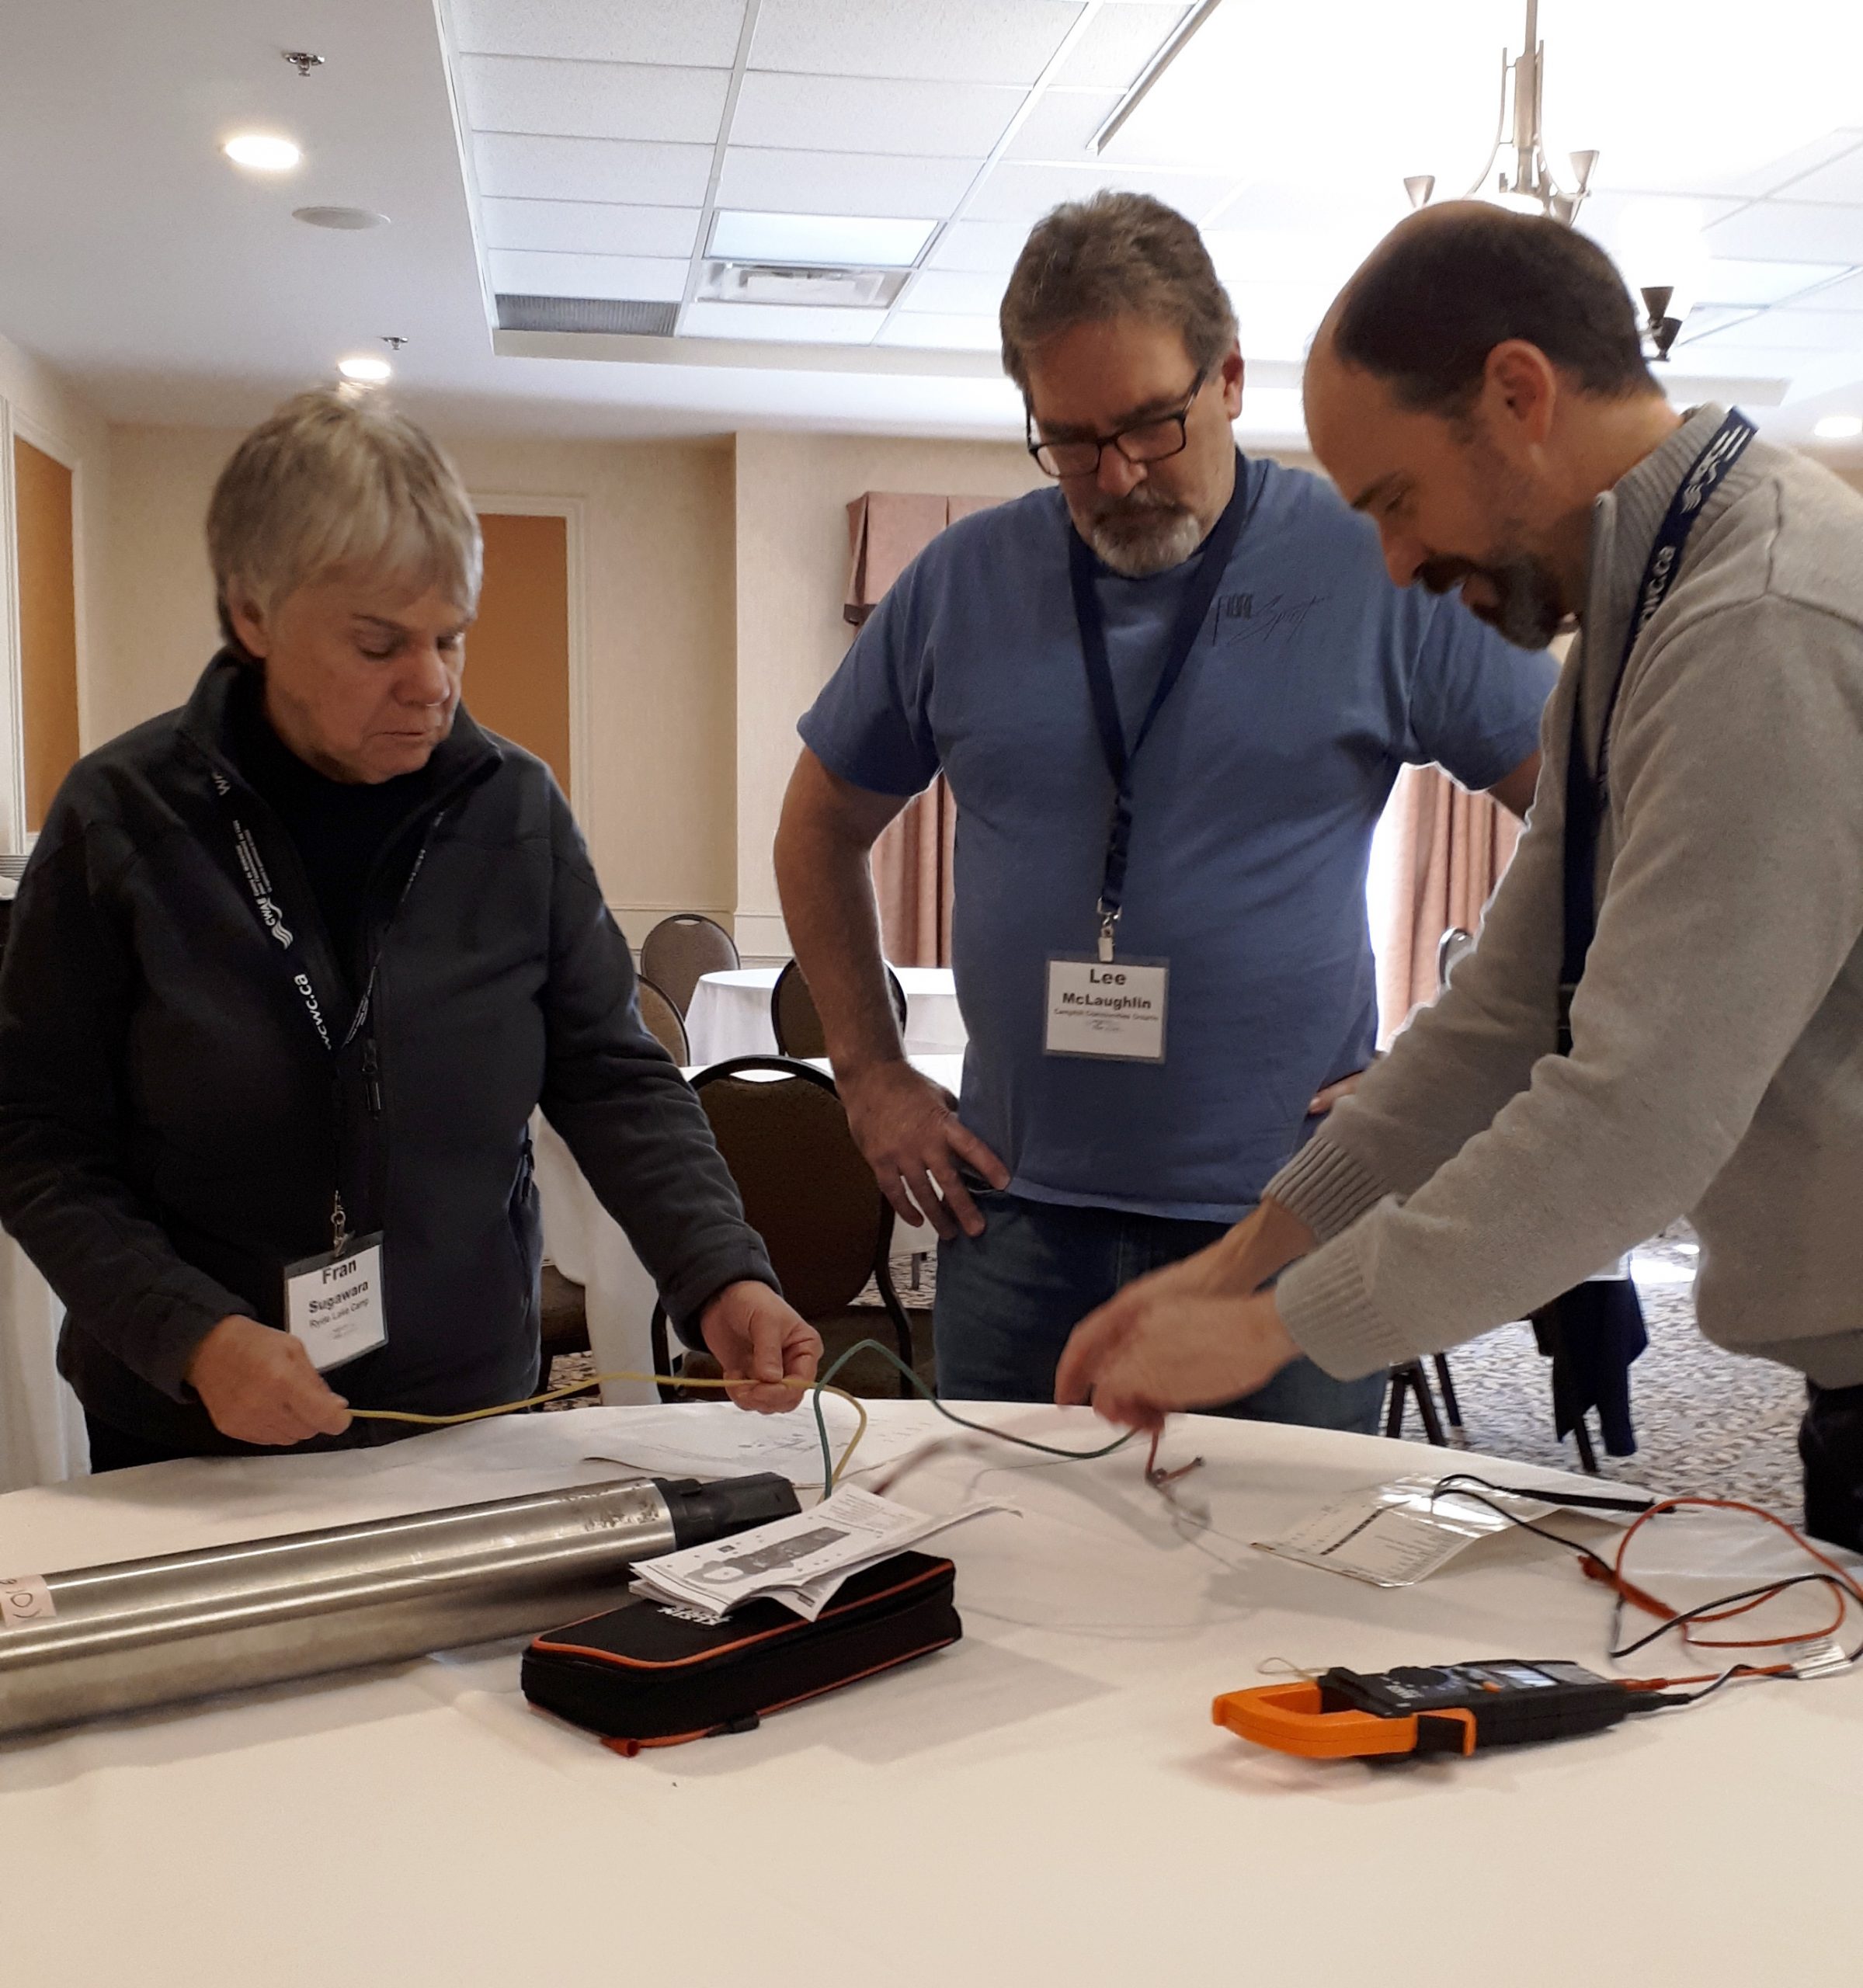 SMALL SYSTEMS HANDS-ON WORKSHOP COMING TO PETERBOROUGH